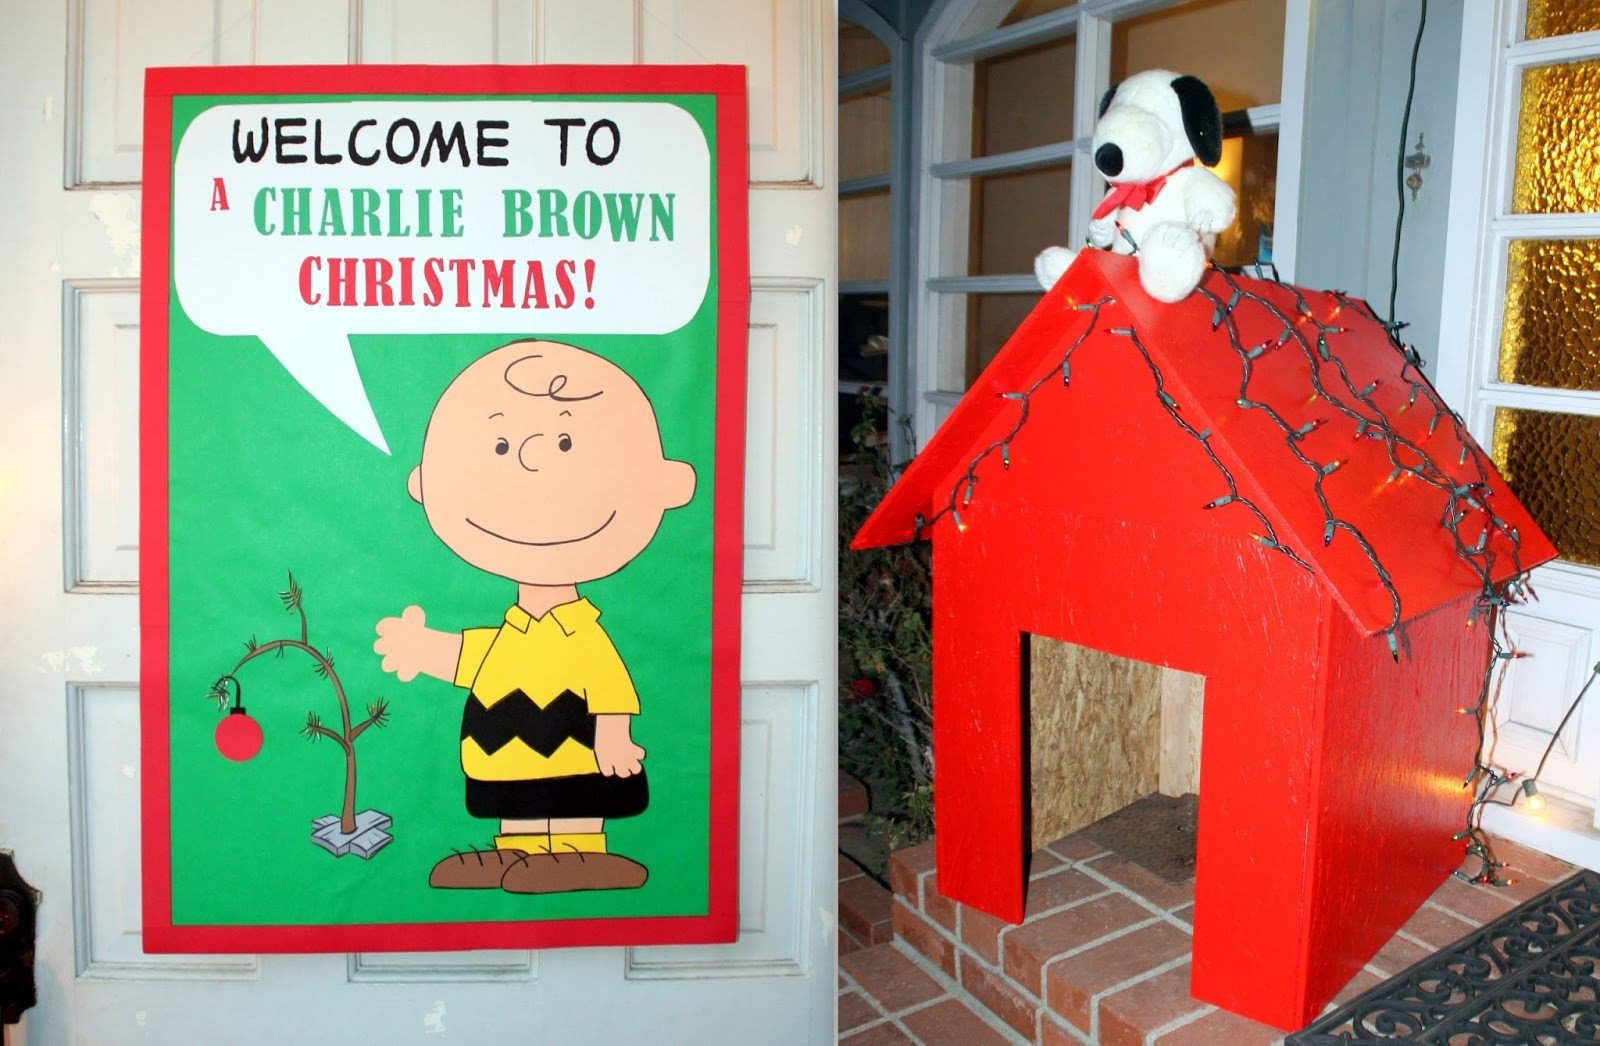 Charlie Brown Christmas Party Ideas
 Invite and Delight Charlie Brown Christmas Party